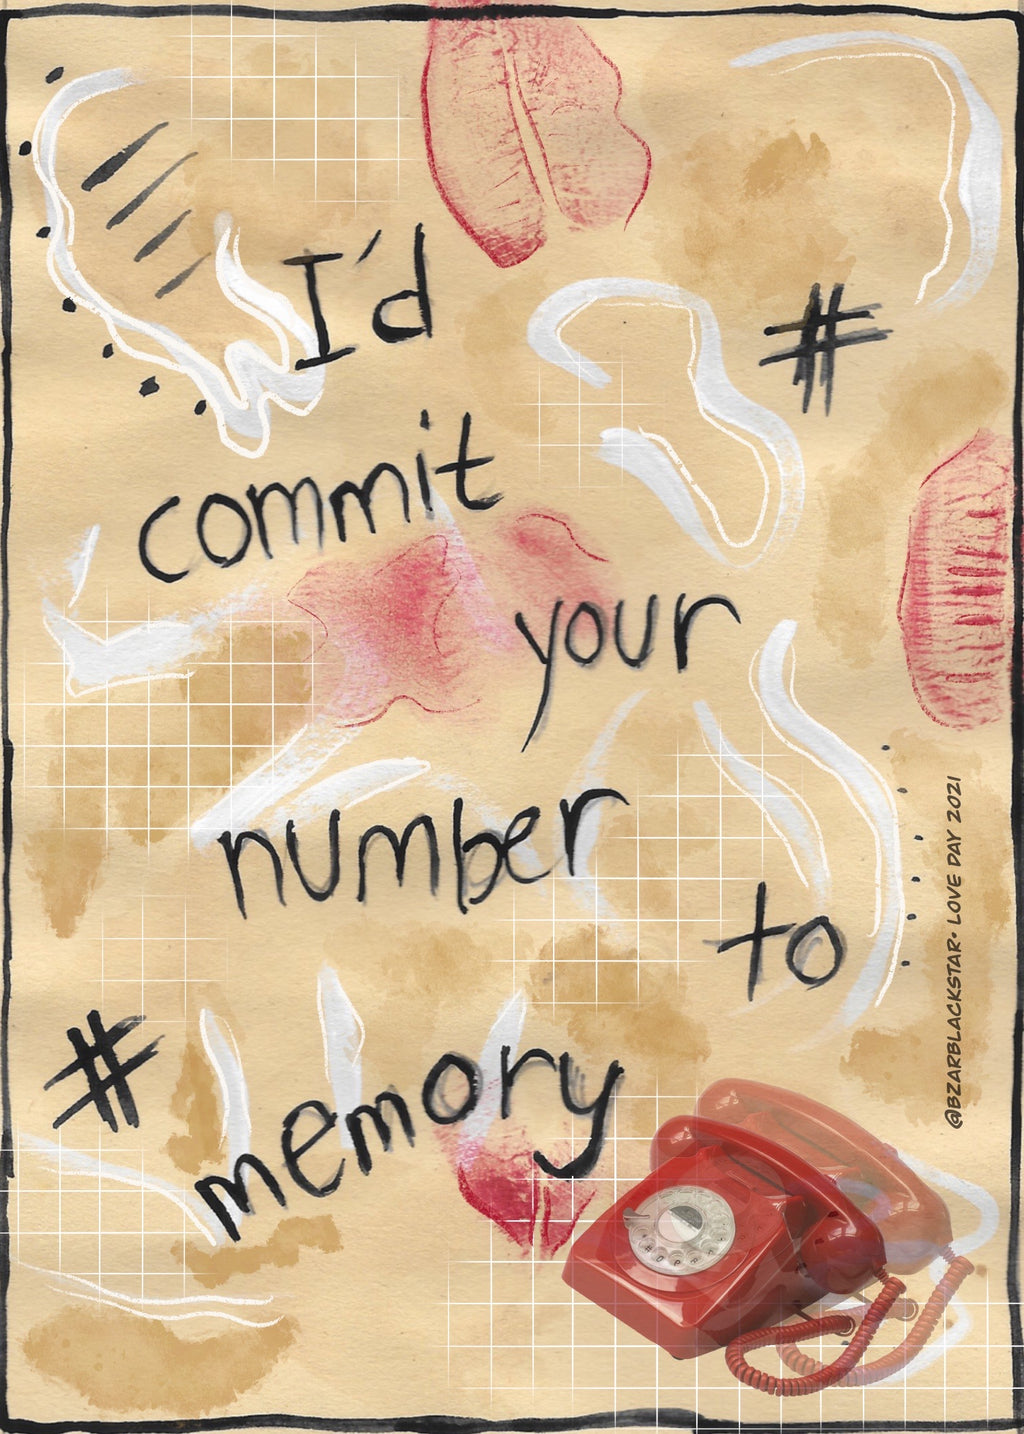 I’d Commit Your Number To Memory